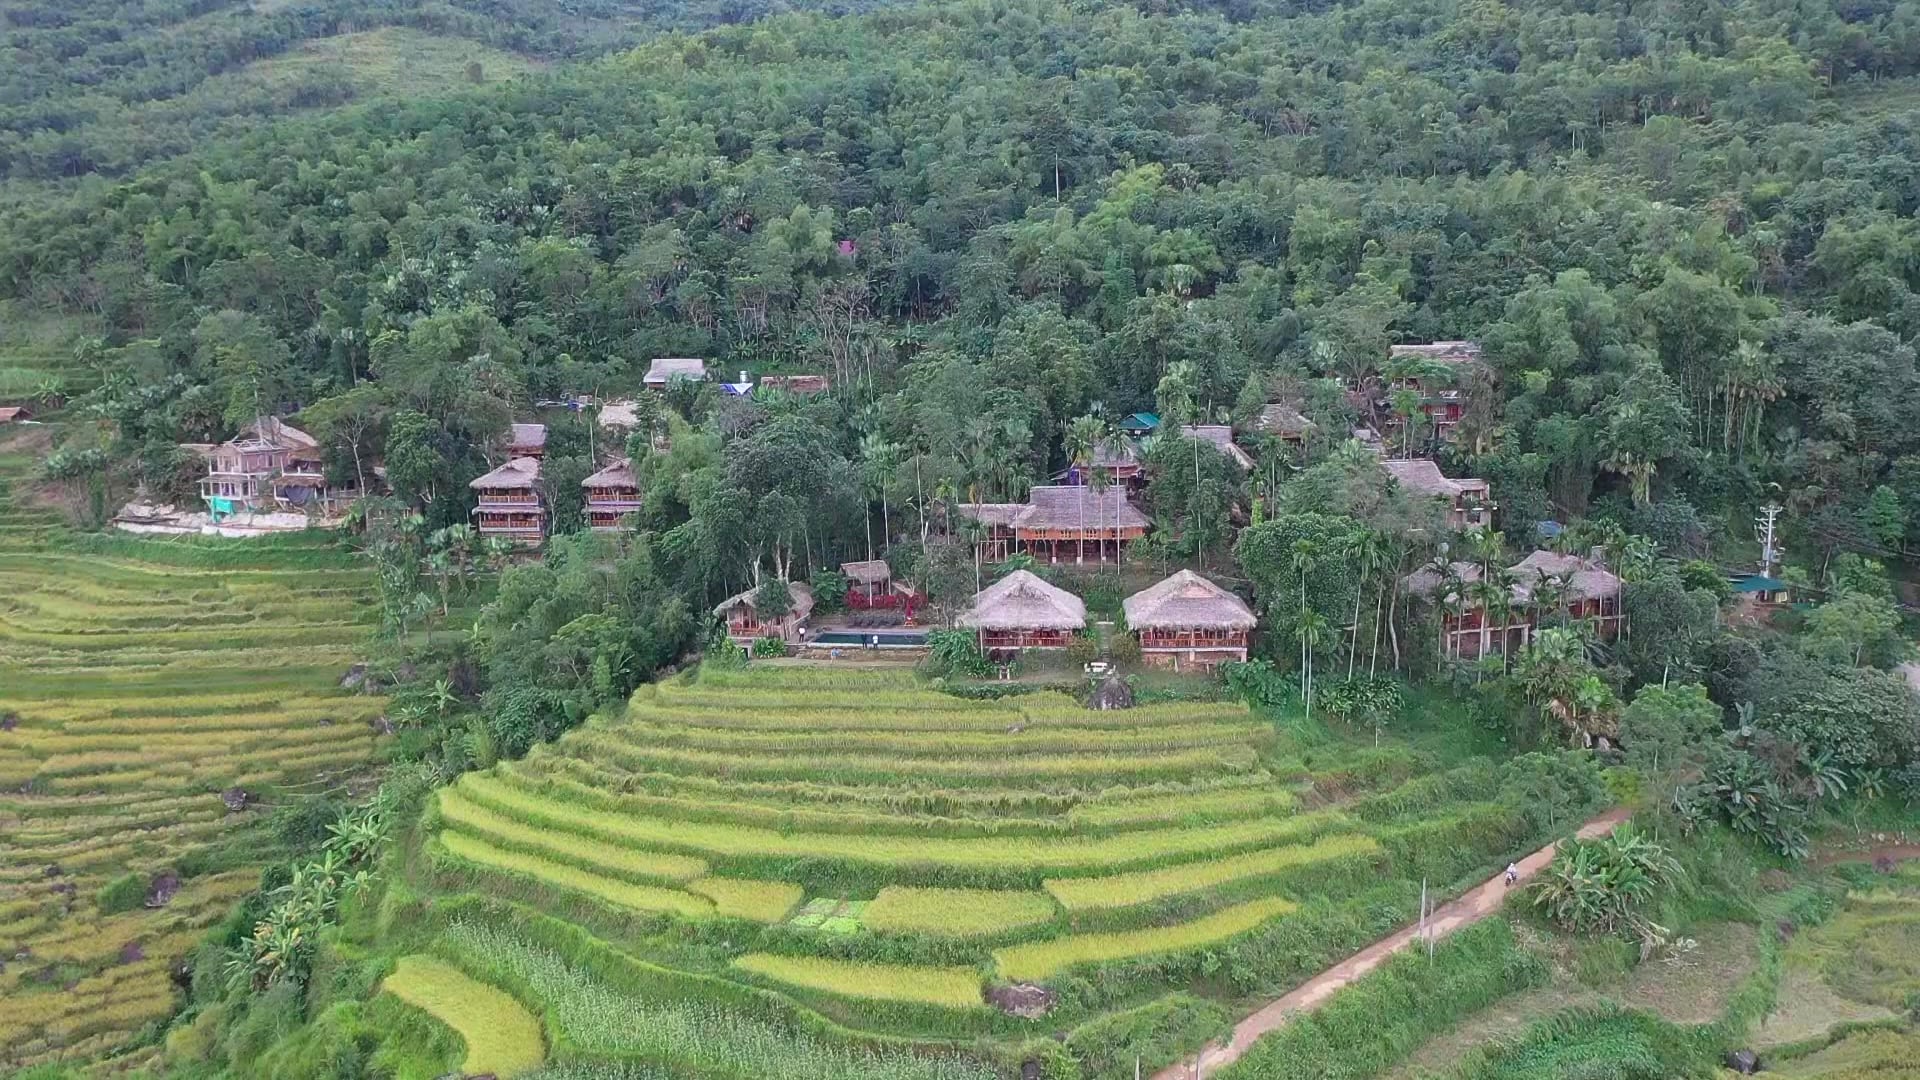 The Thai ethnic village in Pu Luong ecotourism area in Ba Thuoc District, Thanh Hoa Province, northern Vietnam. Photo: Ha Dong / Tuoi Tre